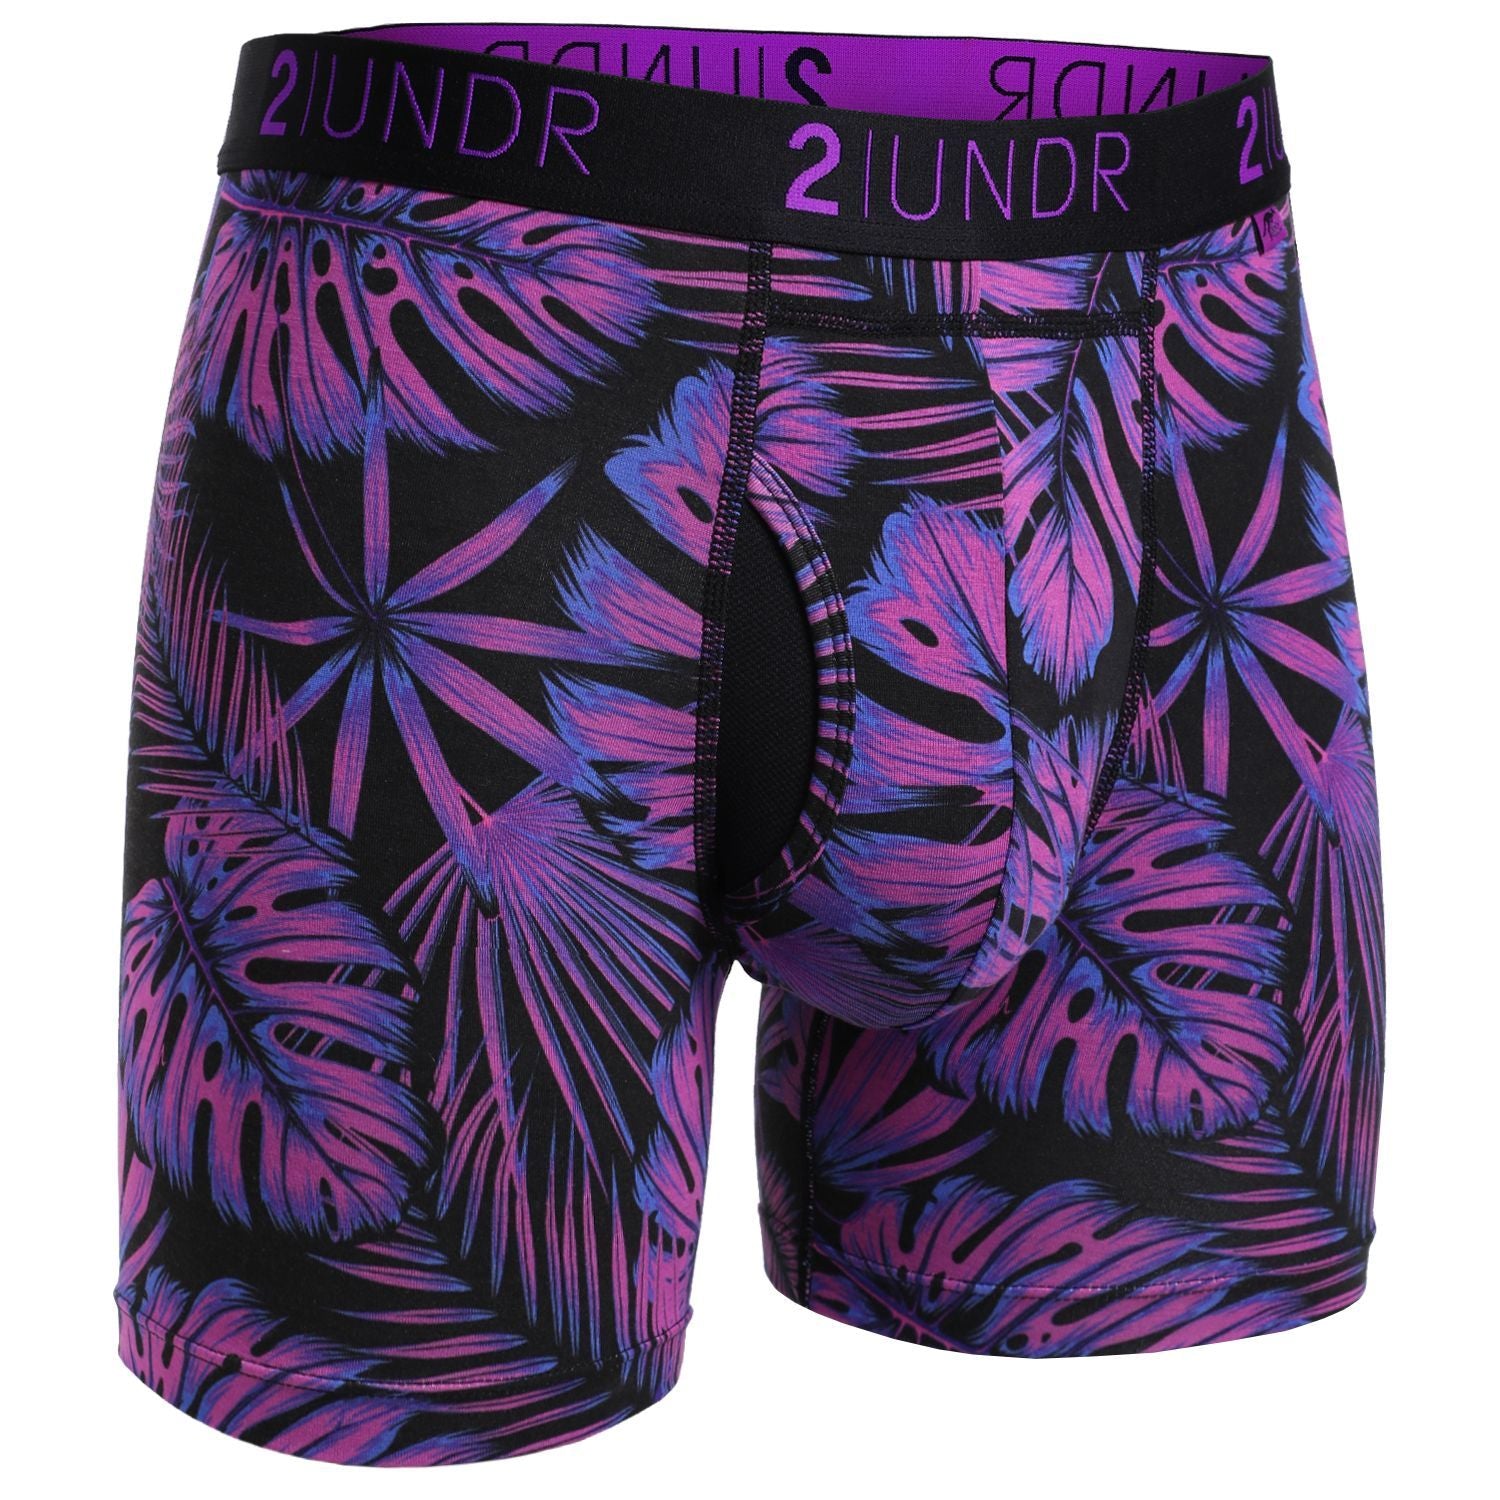 2UNDR - Printed Swing Shift Boxer Brief - Flower Power